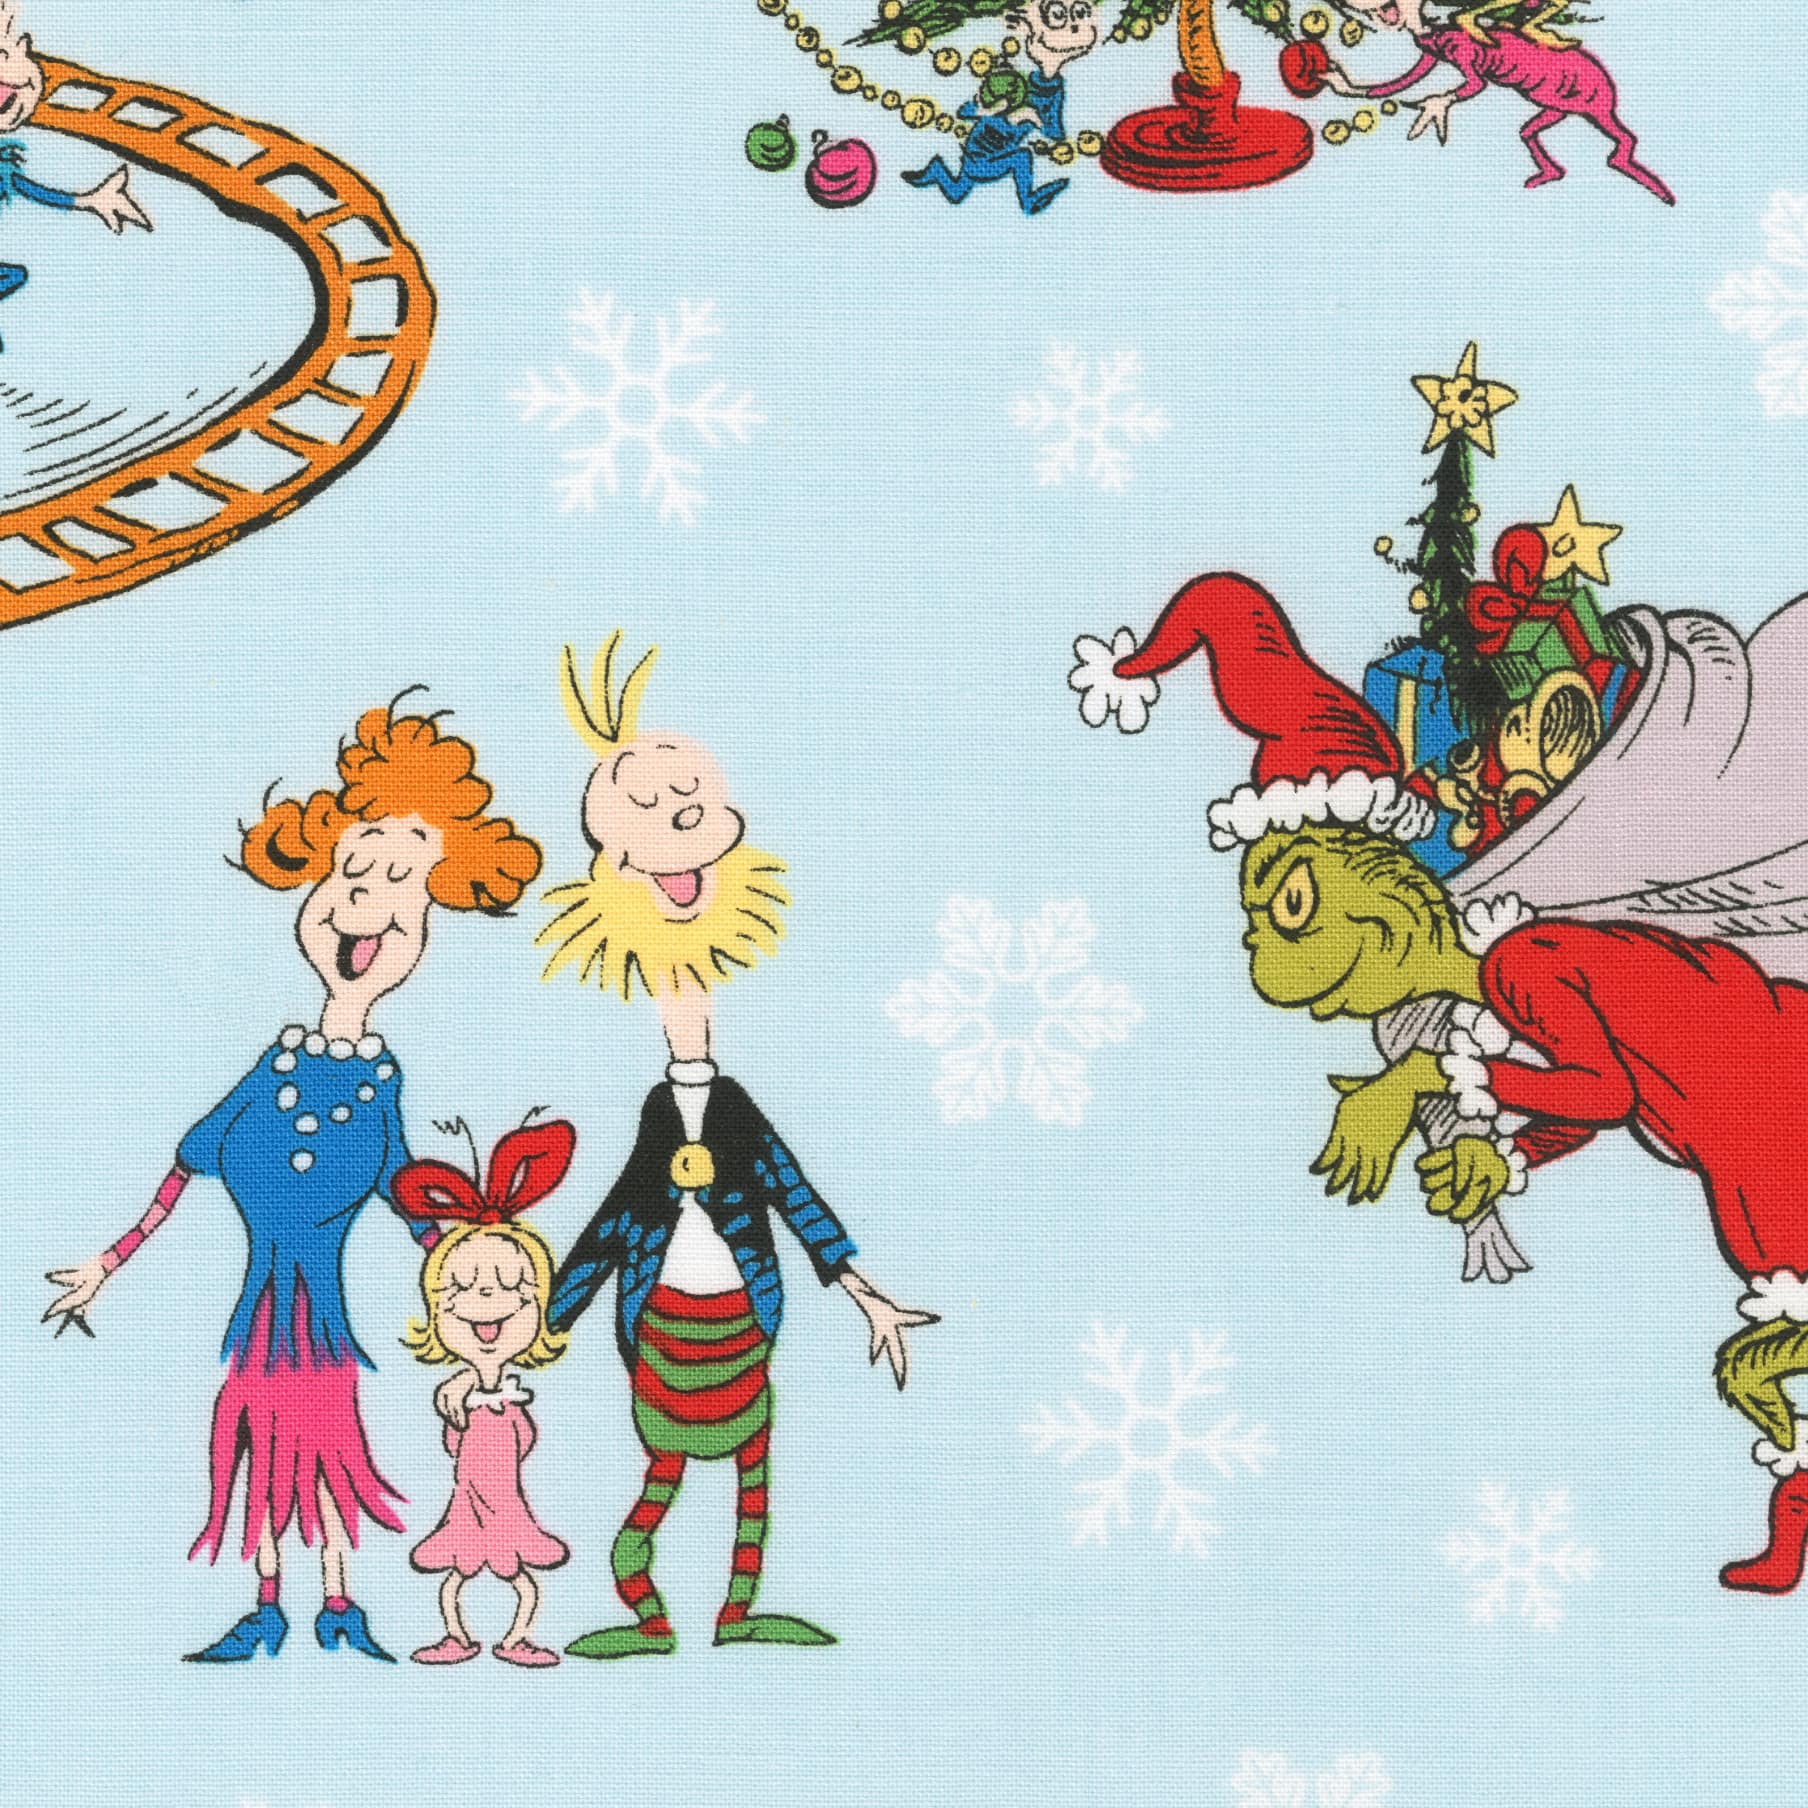 Dr. Seuss™ How the Grinch Stole Christmas Characters Cotton Fabric ...